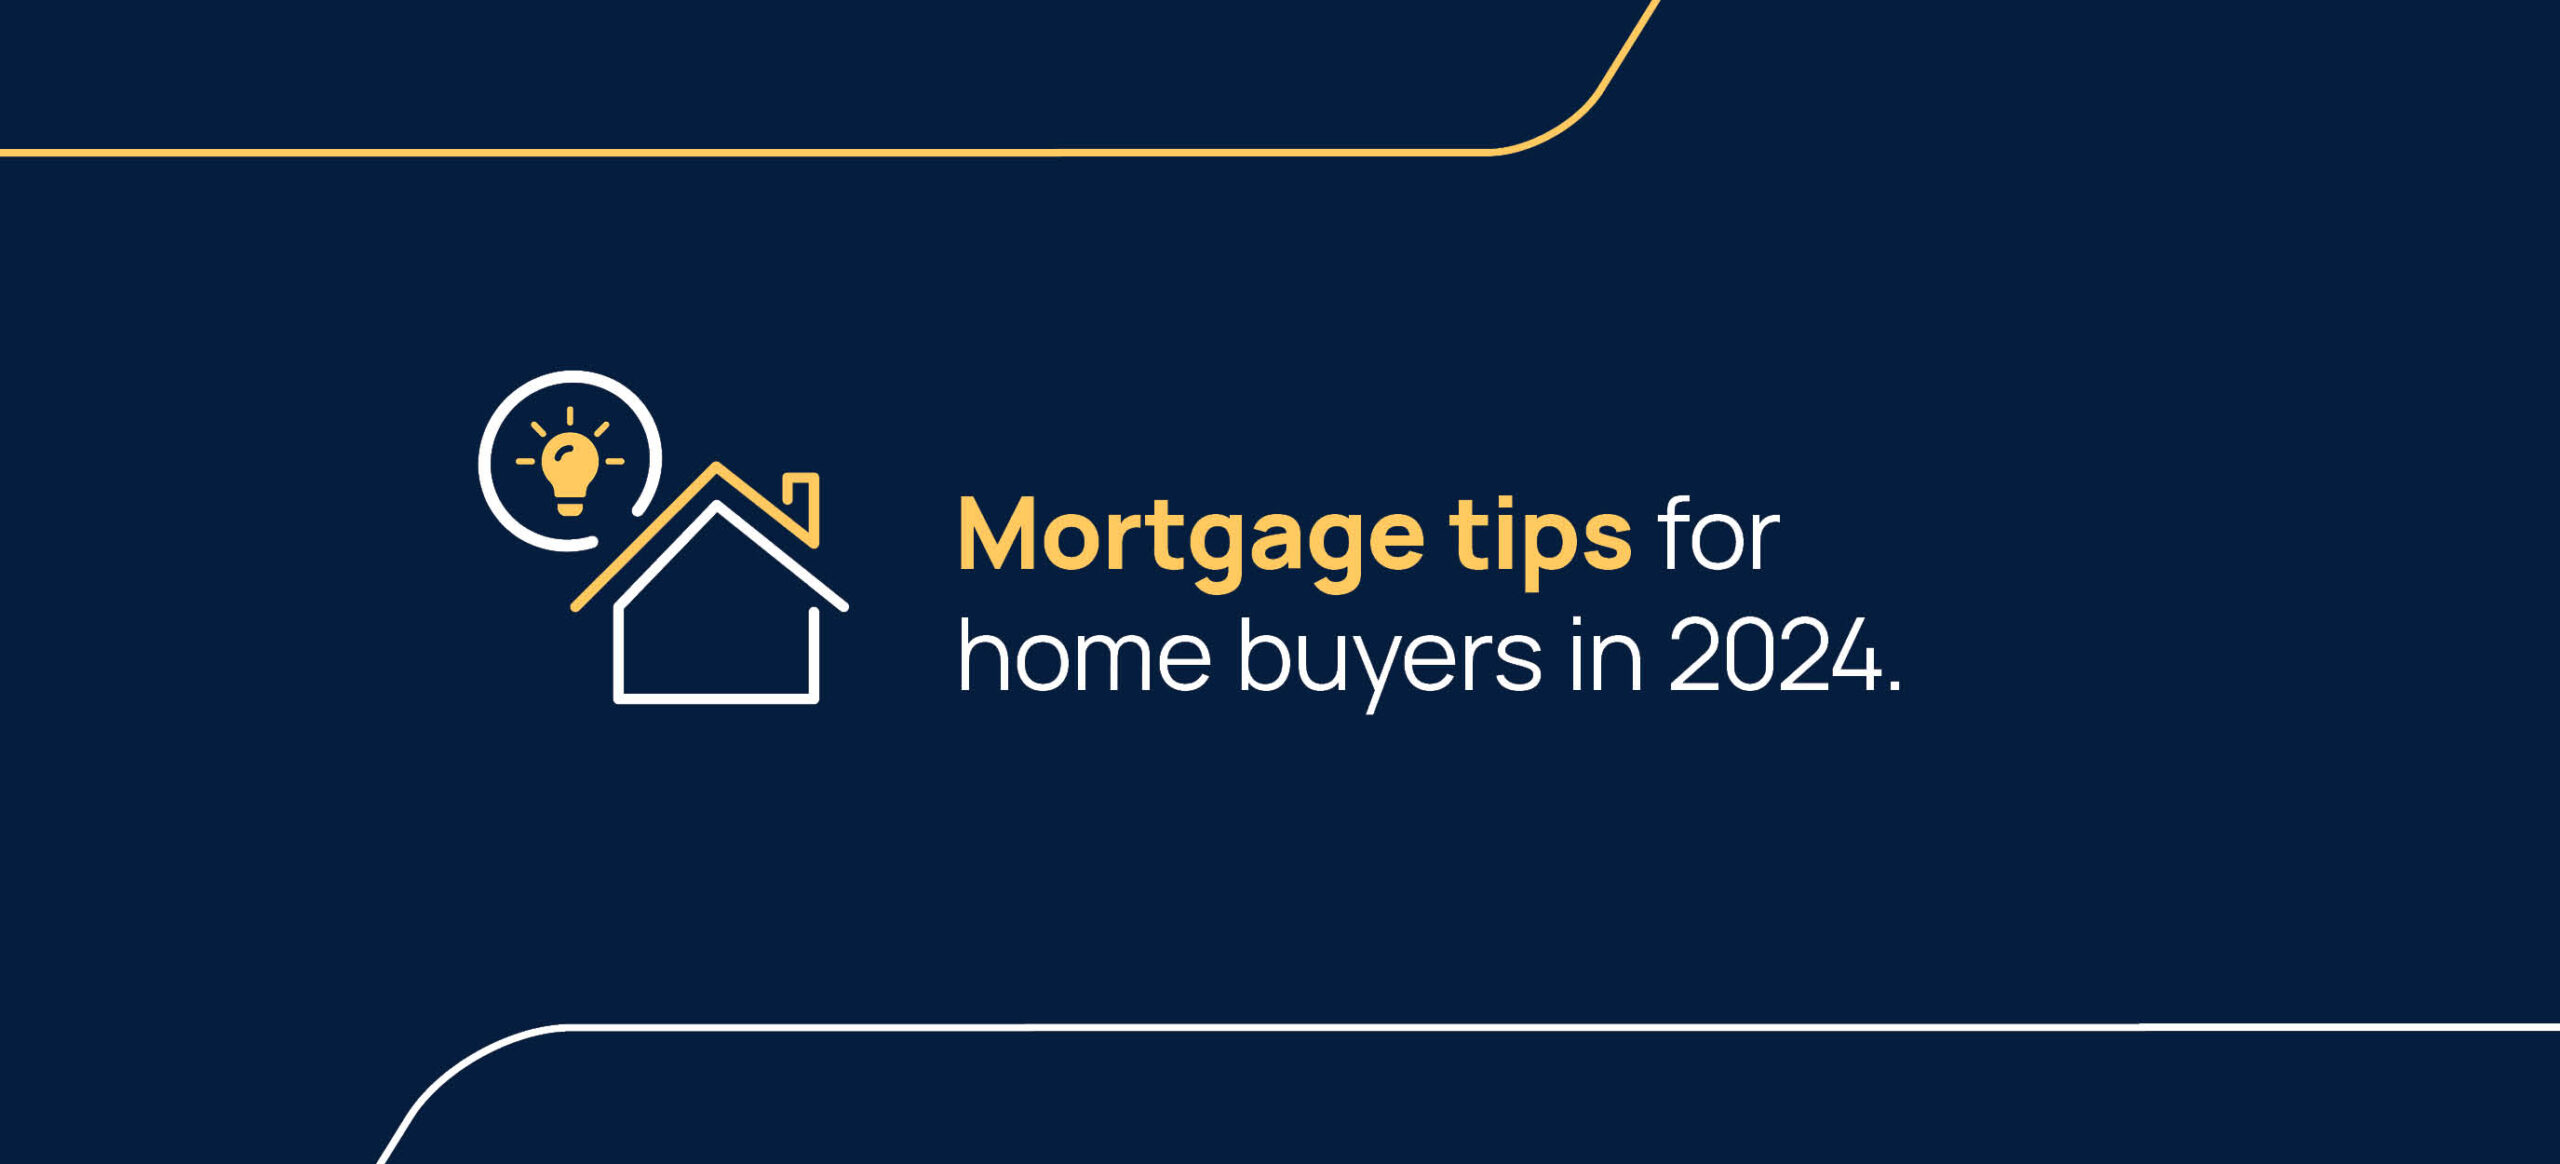 Mortgage tips for home buyers in 2024.